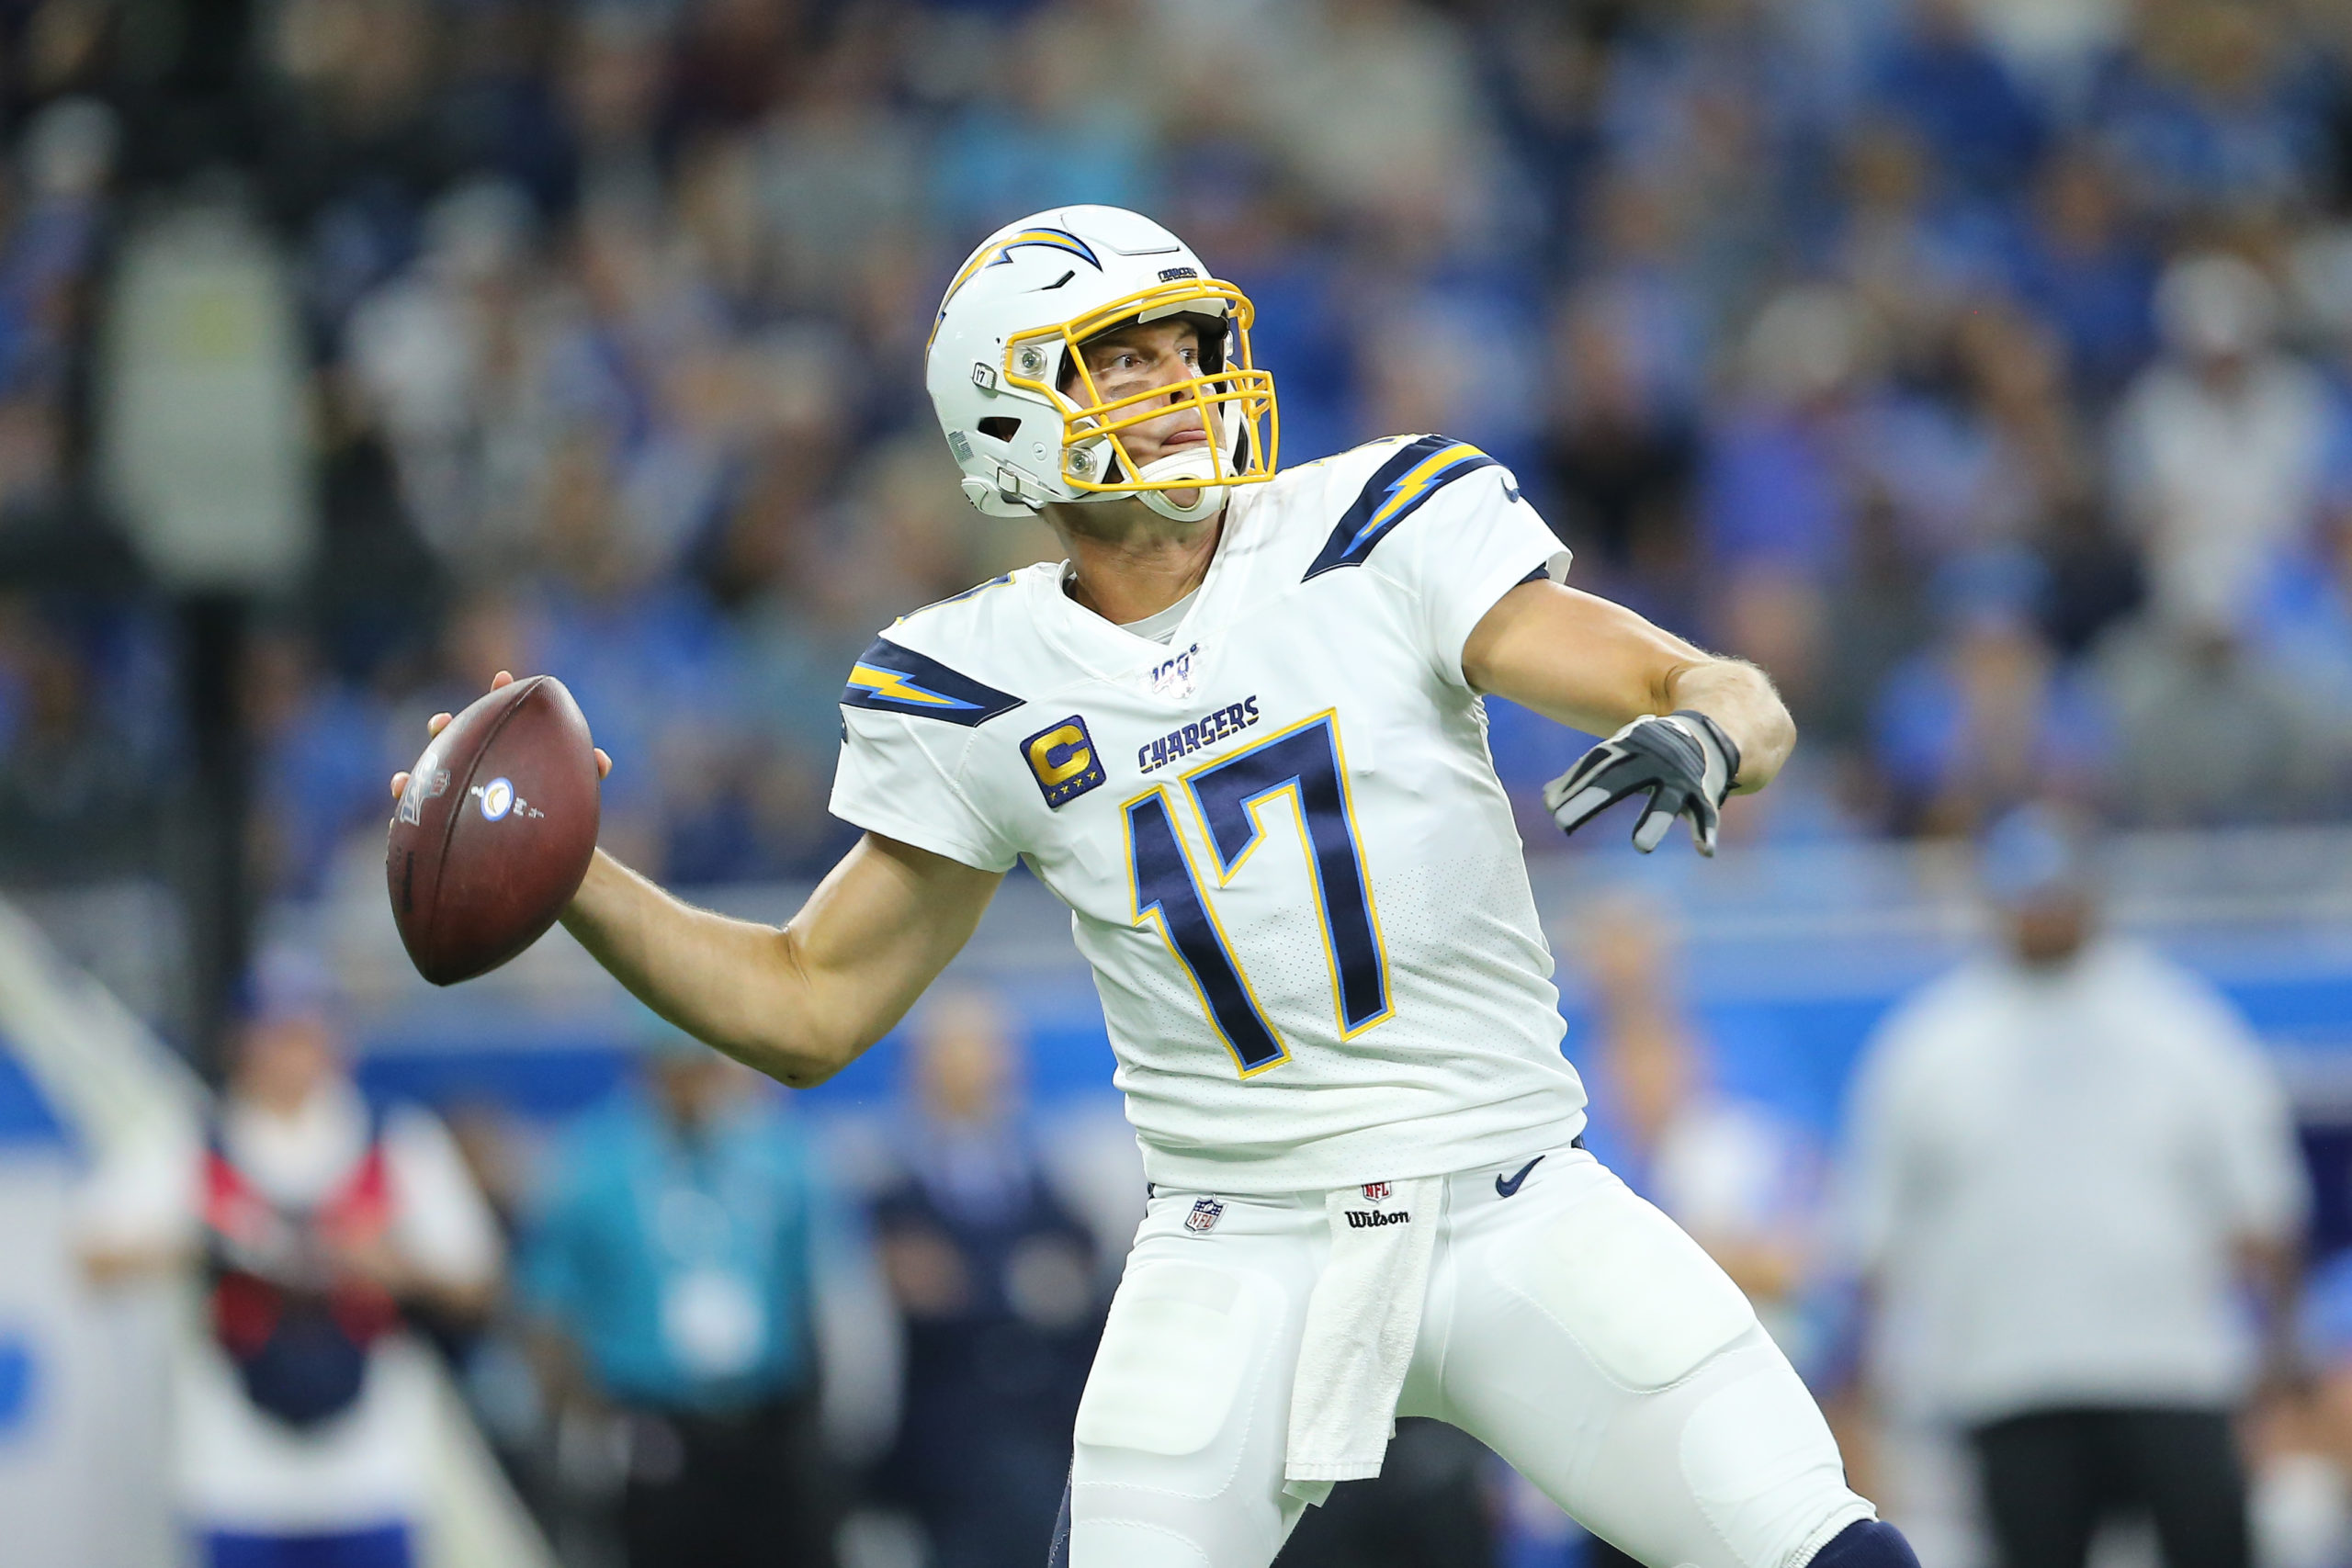 DETROIT, MI - SEPTEMBER 15: Philip Rivers #17 of the Los Angeles Chargers drops back to pass during the first quarter of the game against the Detroit Lions at Ford Field on September 15, 2019 in Detroit, Michigan. Rey Del Rio/Getty Images